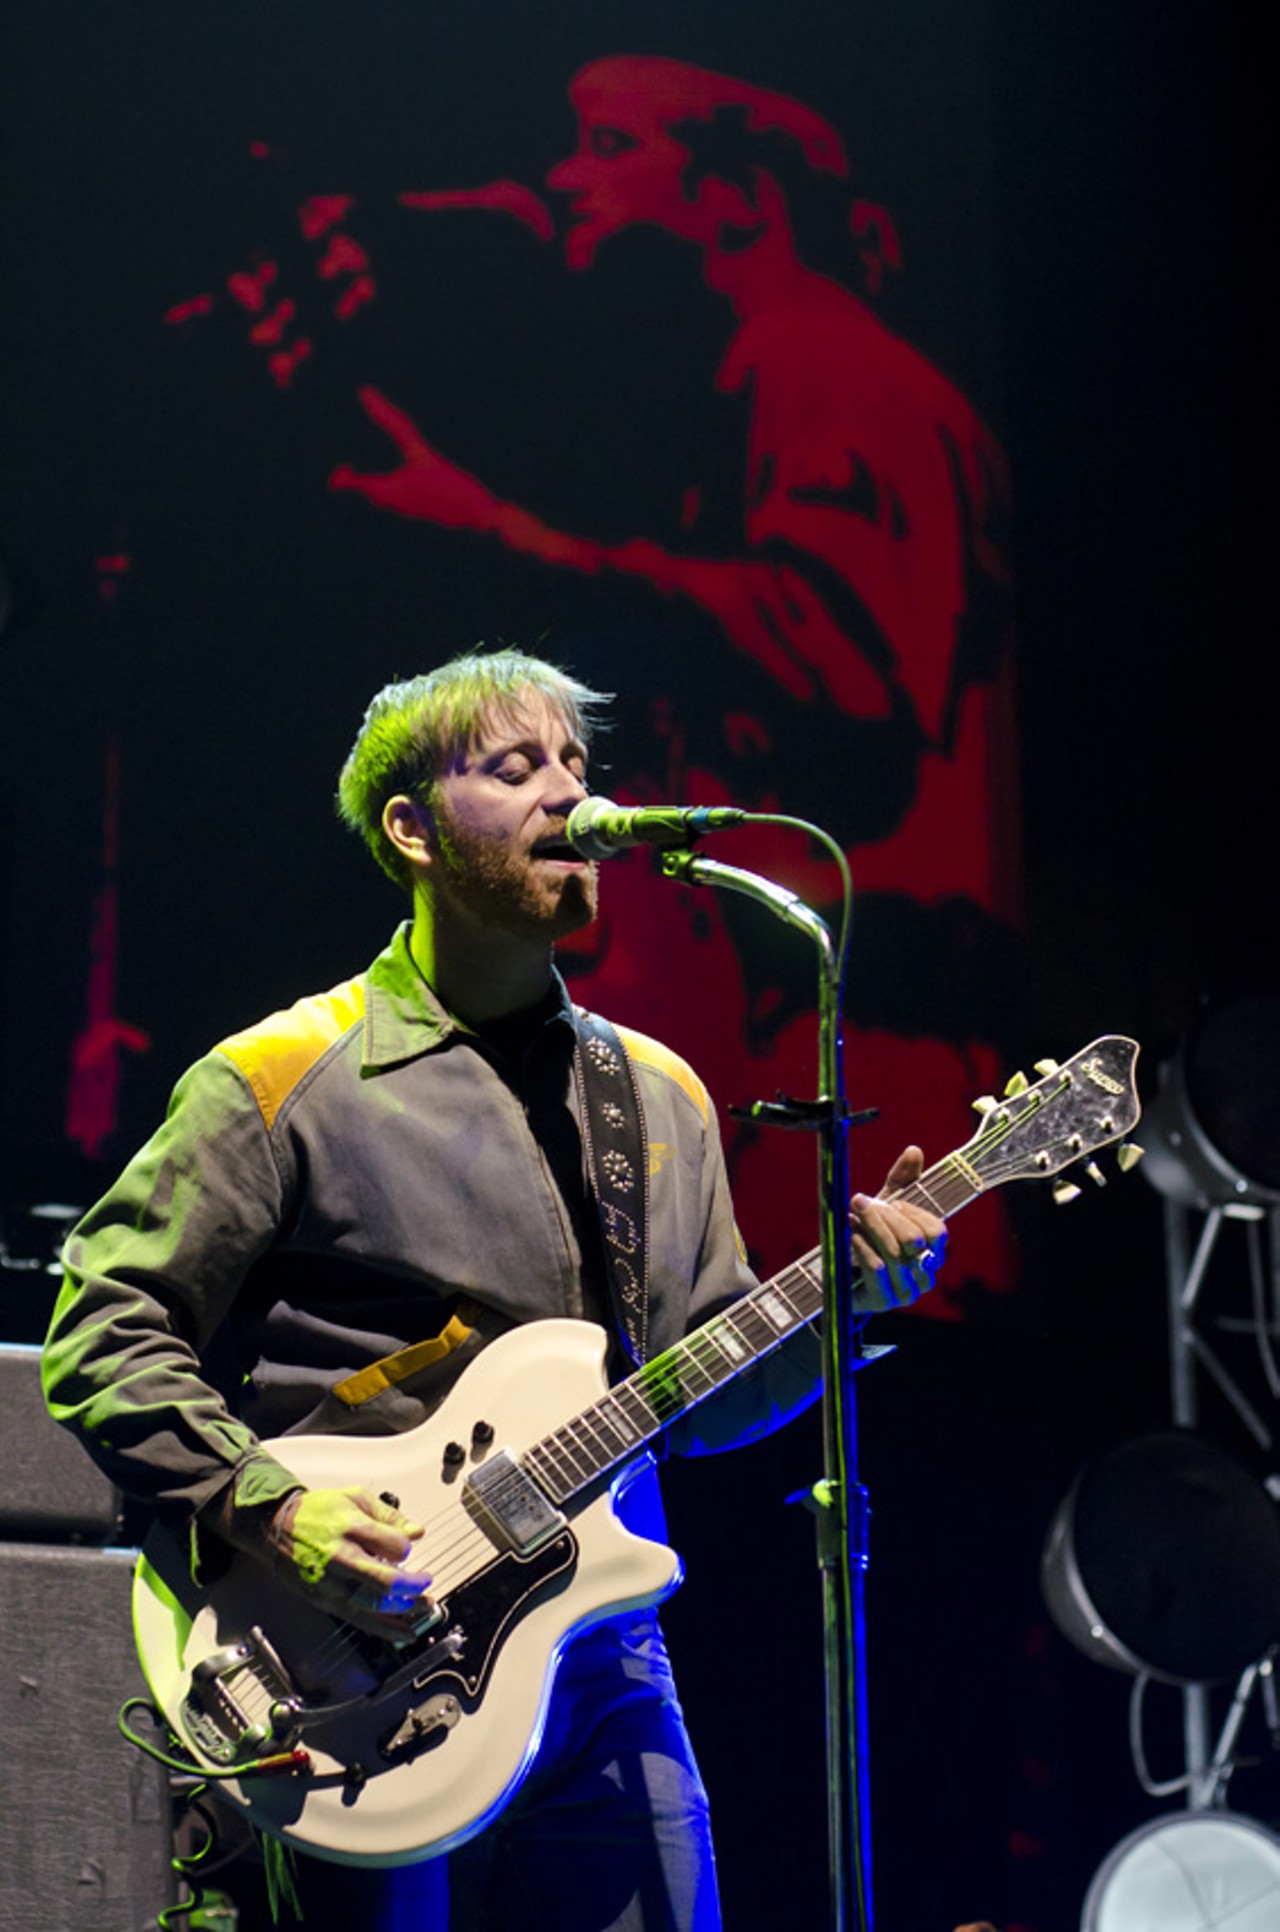 Dan Auerbach of The Black Keys performing at the Chaifetz Arena in St. Louis on Friday, April 27.